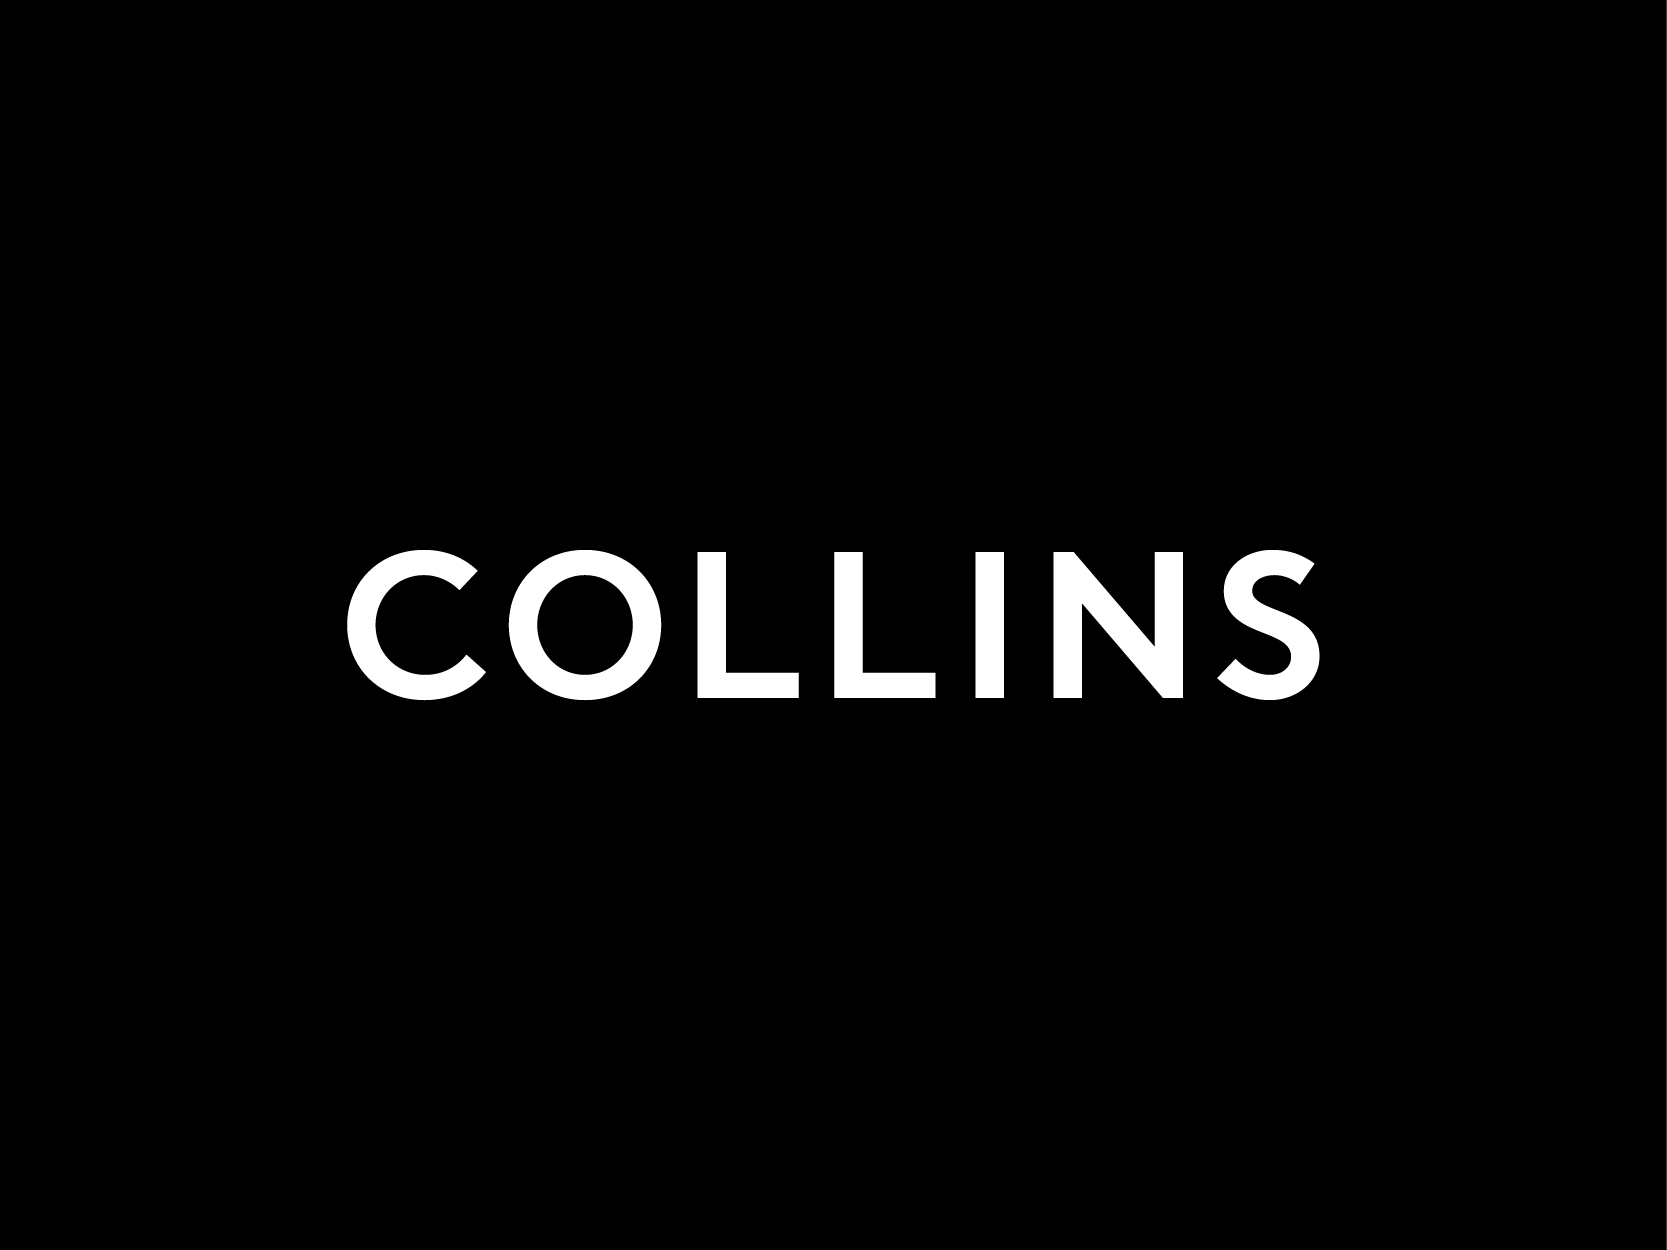 We are COLLINS | COLLINS